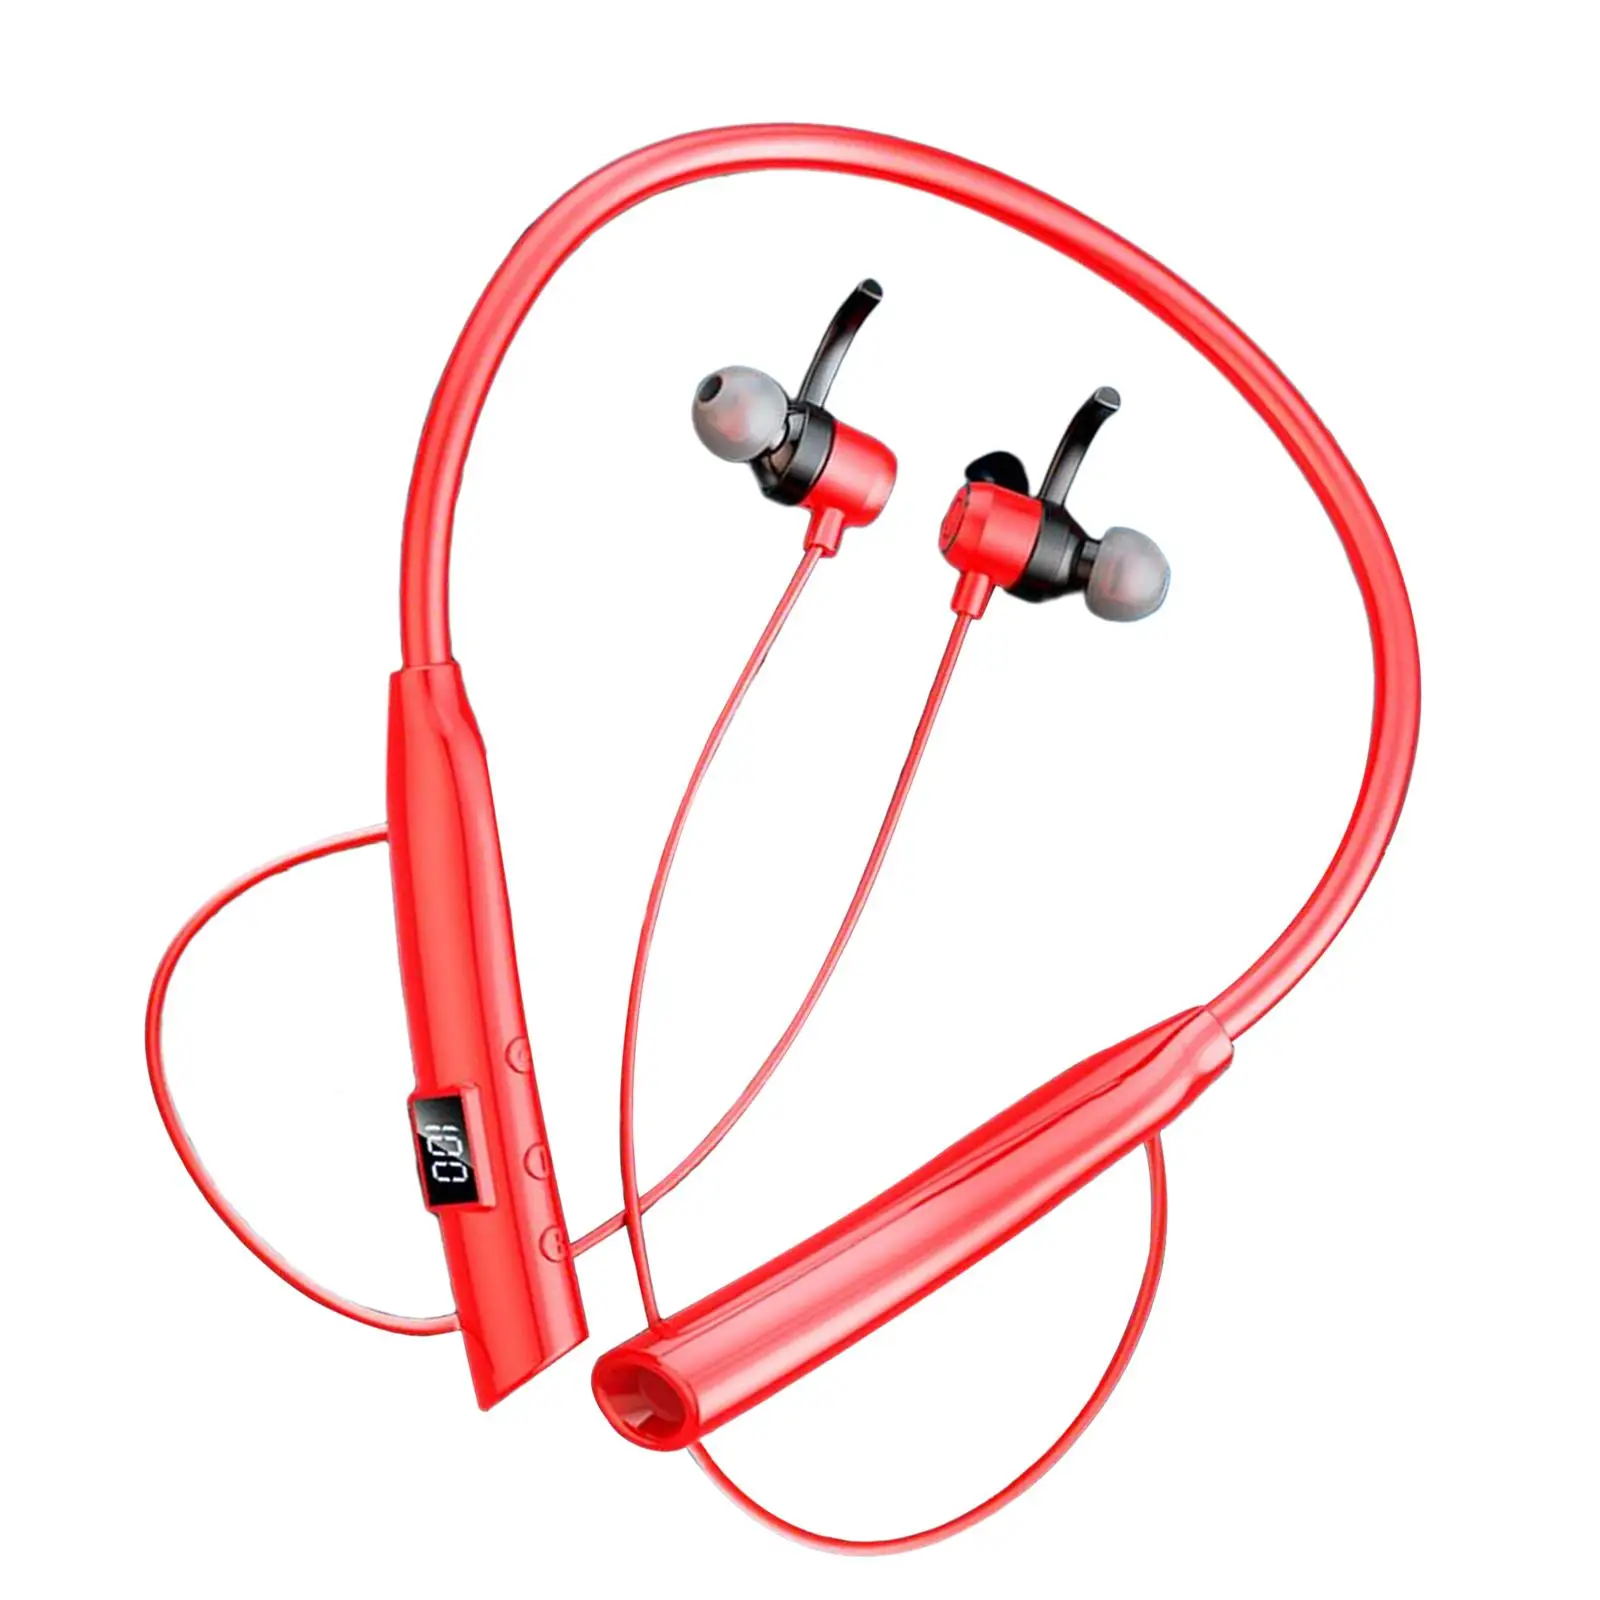 Neckband Headphones IPX5 Waterproof HiFi Stereo Support TF Card Calls in Ear Around Neck Headphones for Sports